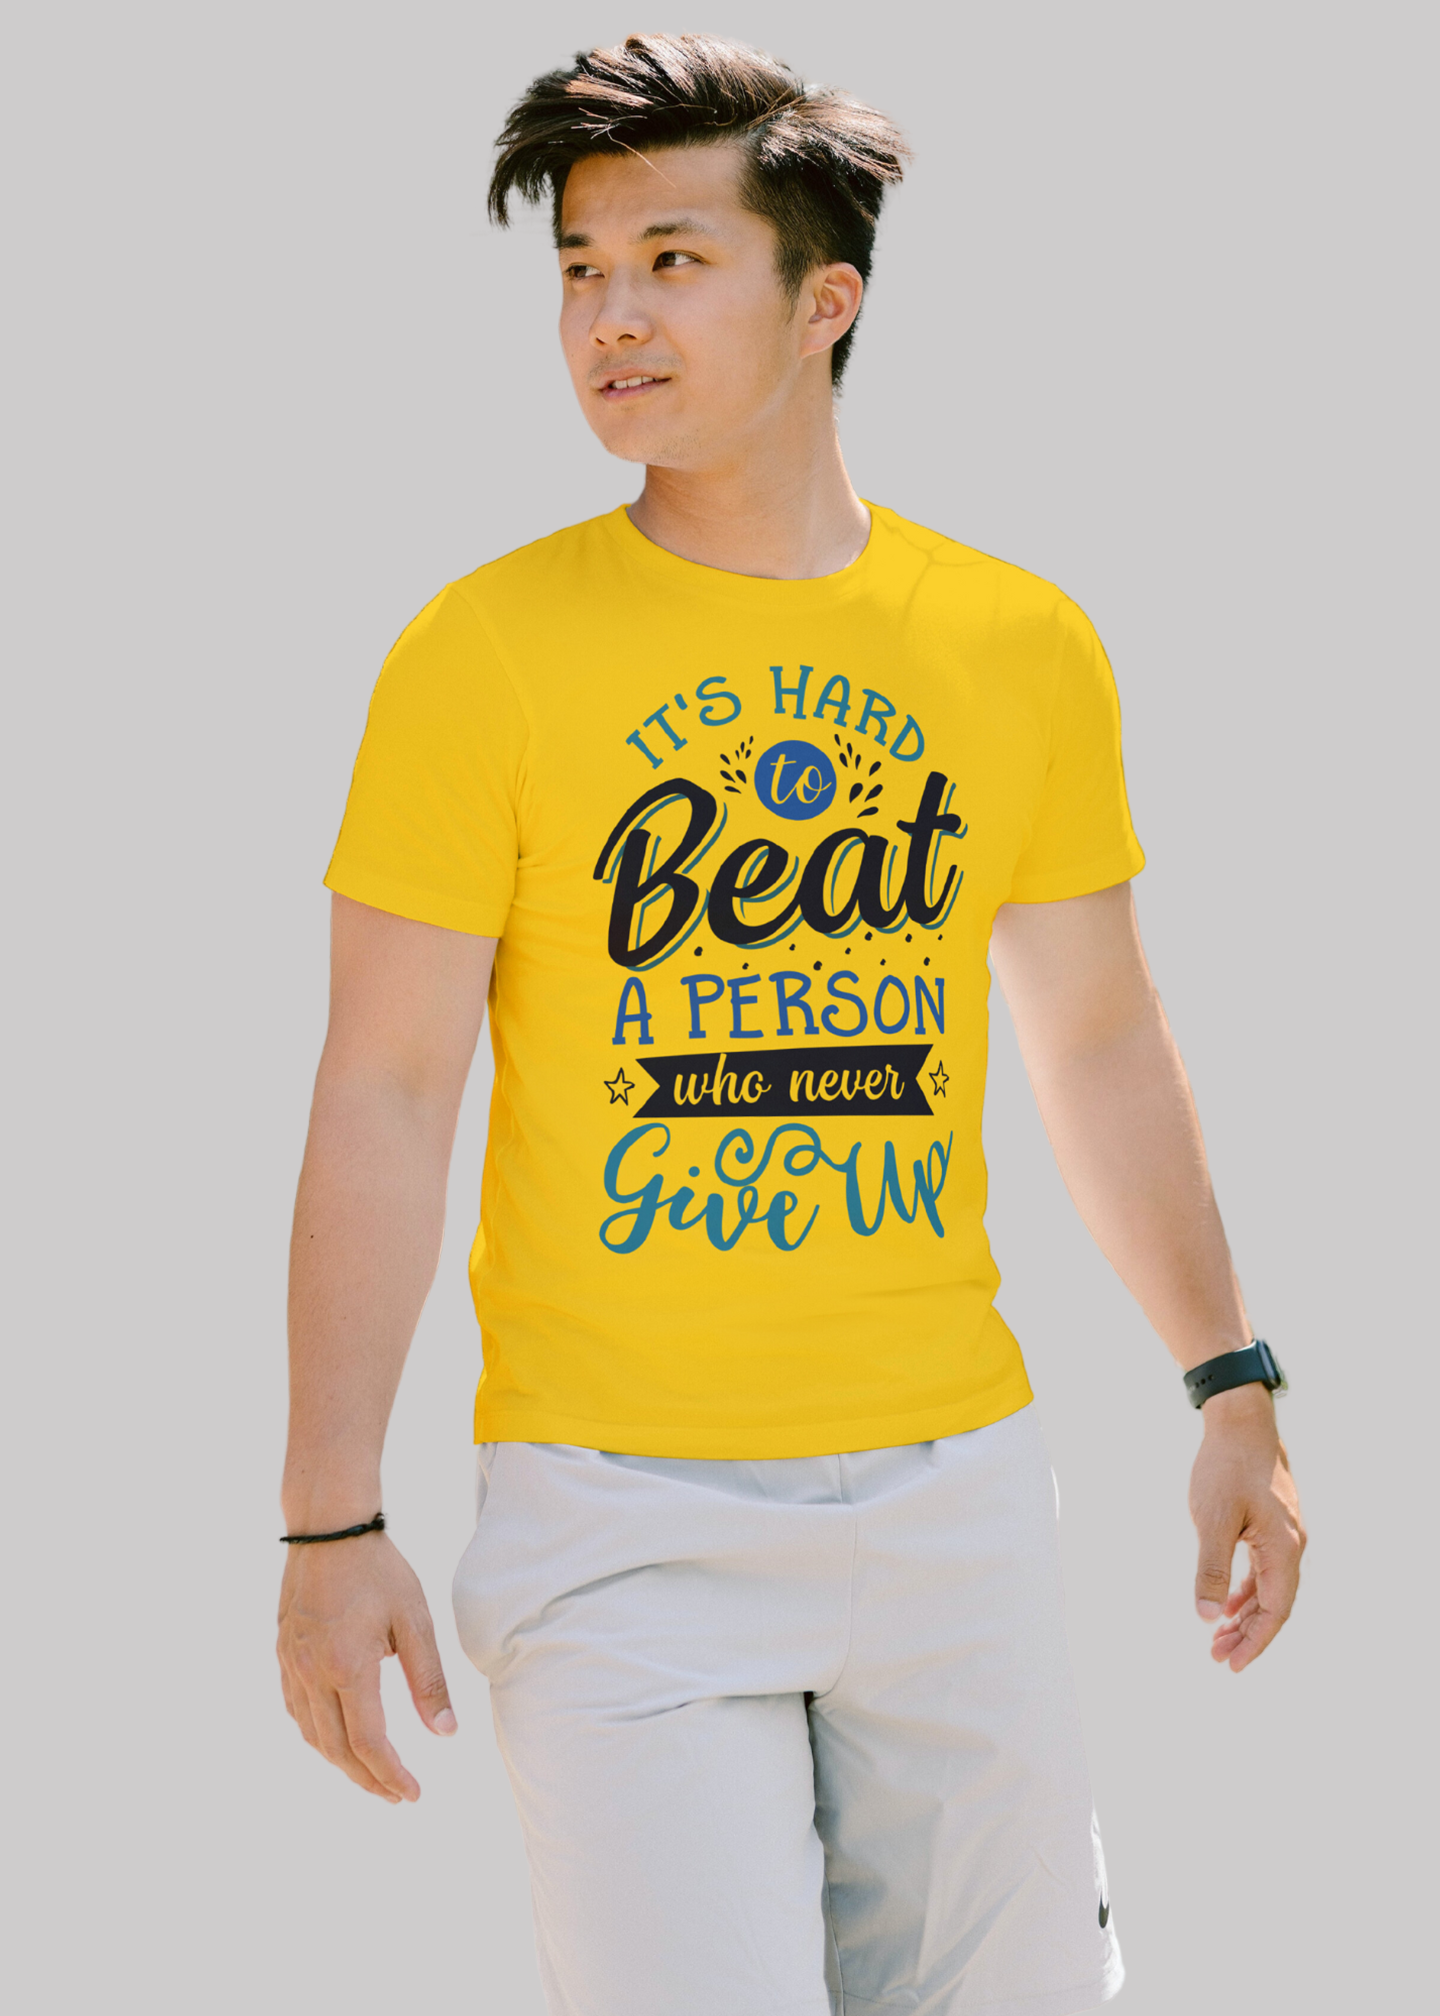 It's hard to beat a person who never give up Printed Half Sleeve Premium Cotton T-shirt For Men